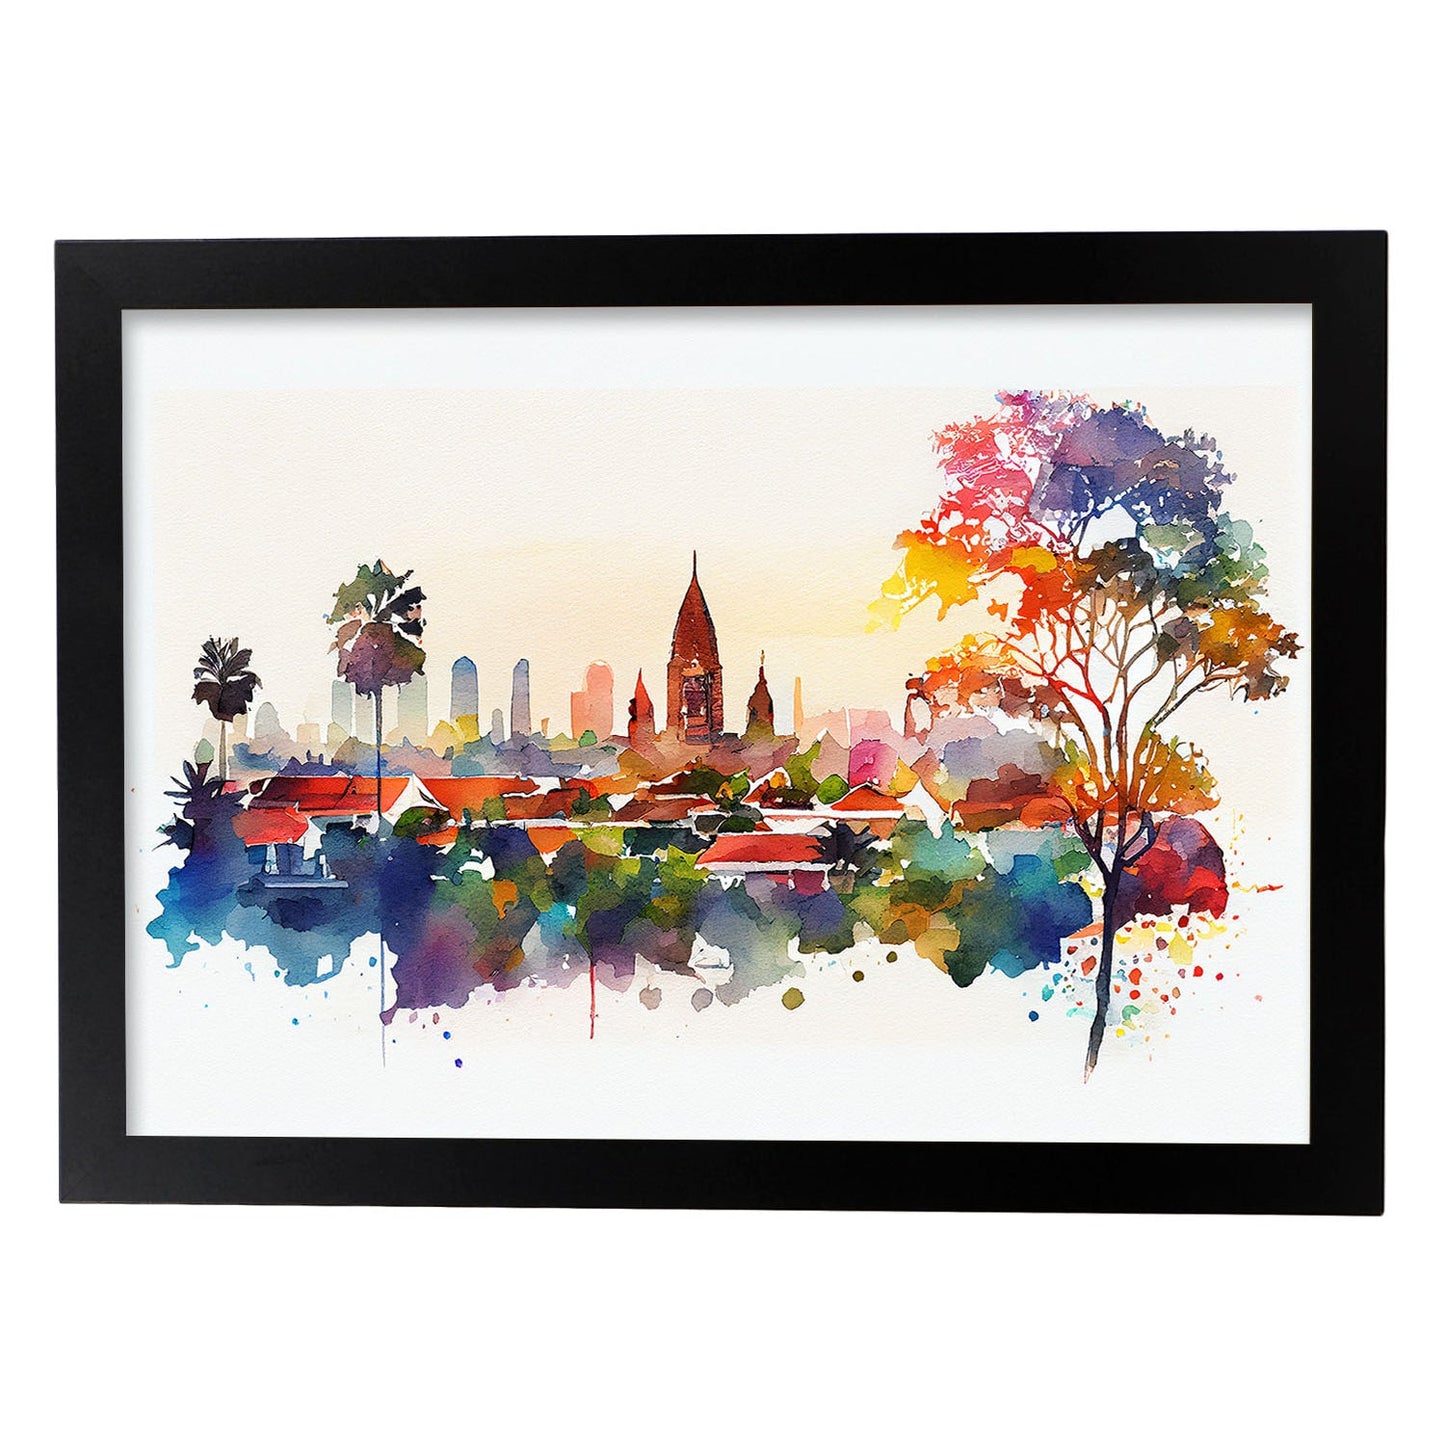 Nacnic watercolor of a skyline of the city of Bali_1. Aesthetic Wall Art Prints for Bedroom or Living Room Design.